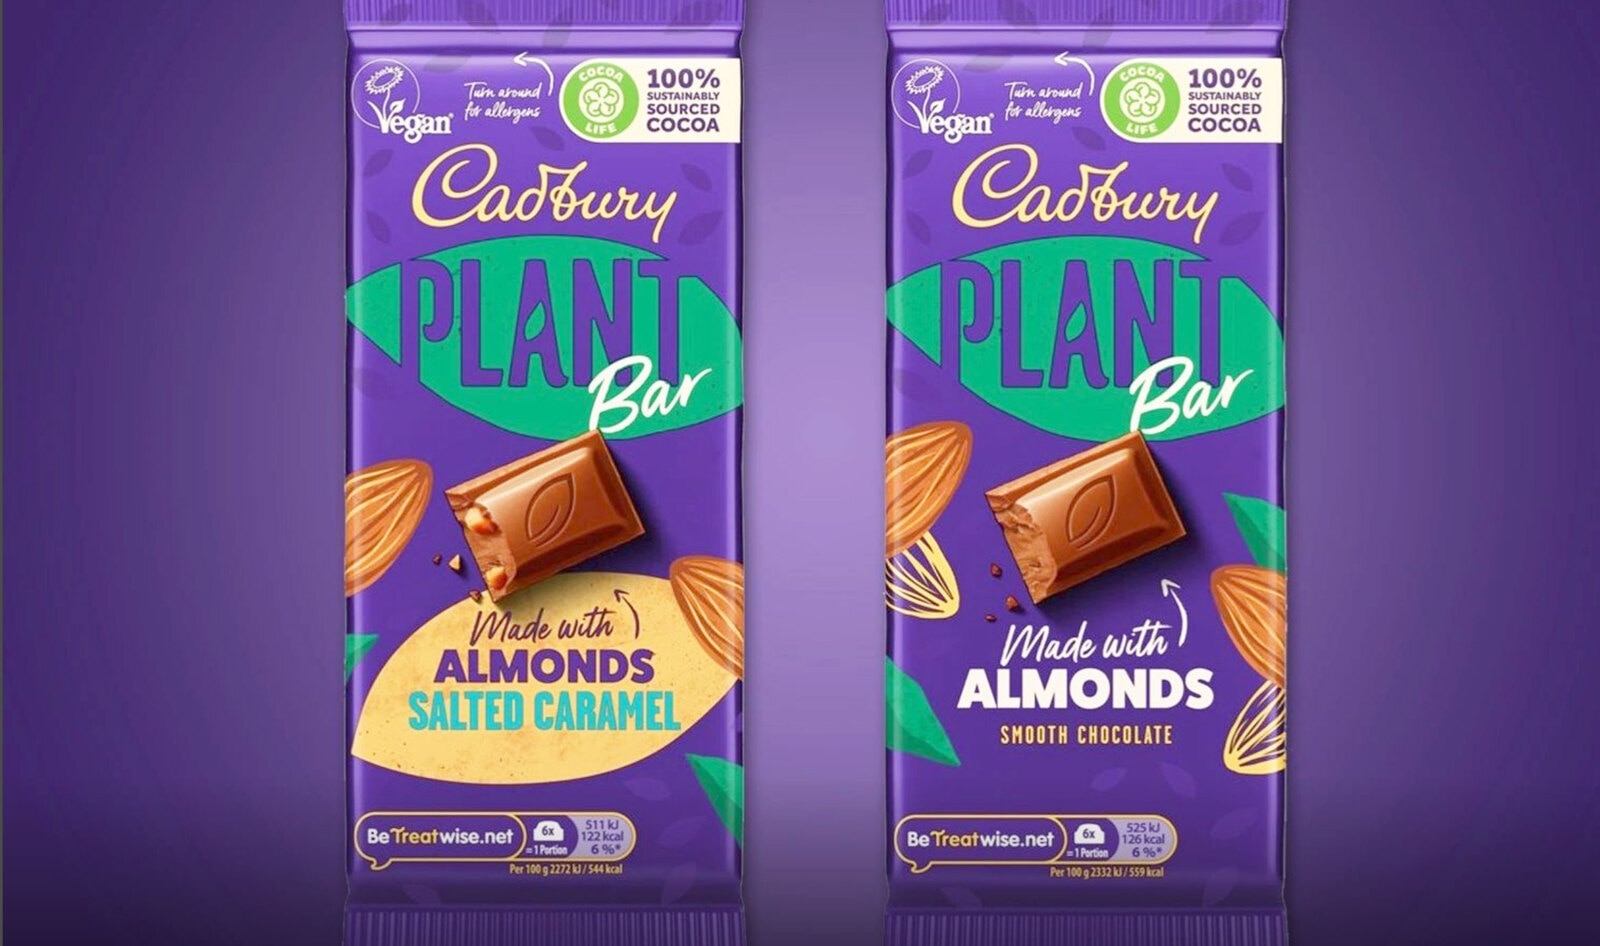 Cadbury Launches Its First Vegan Chocolate Bars: “Sorry It’s Taken So Long”